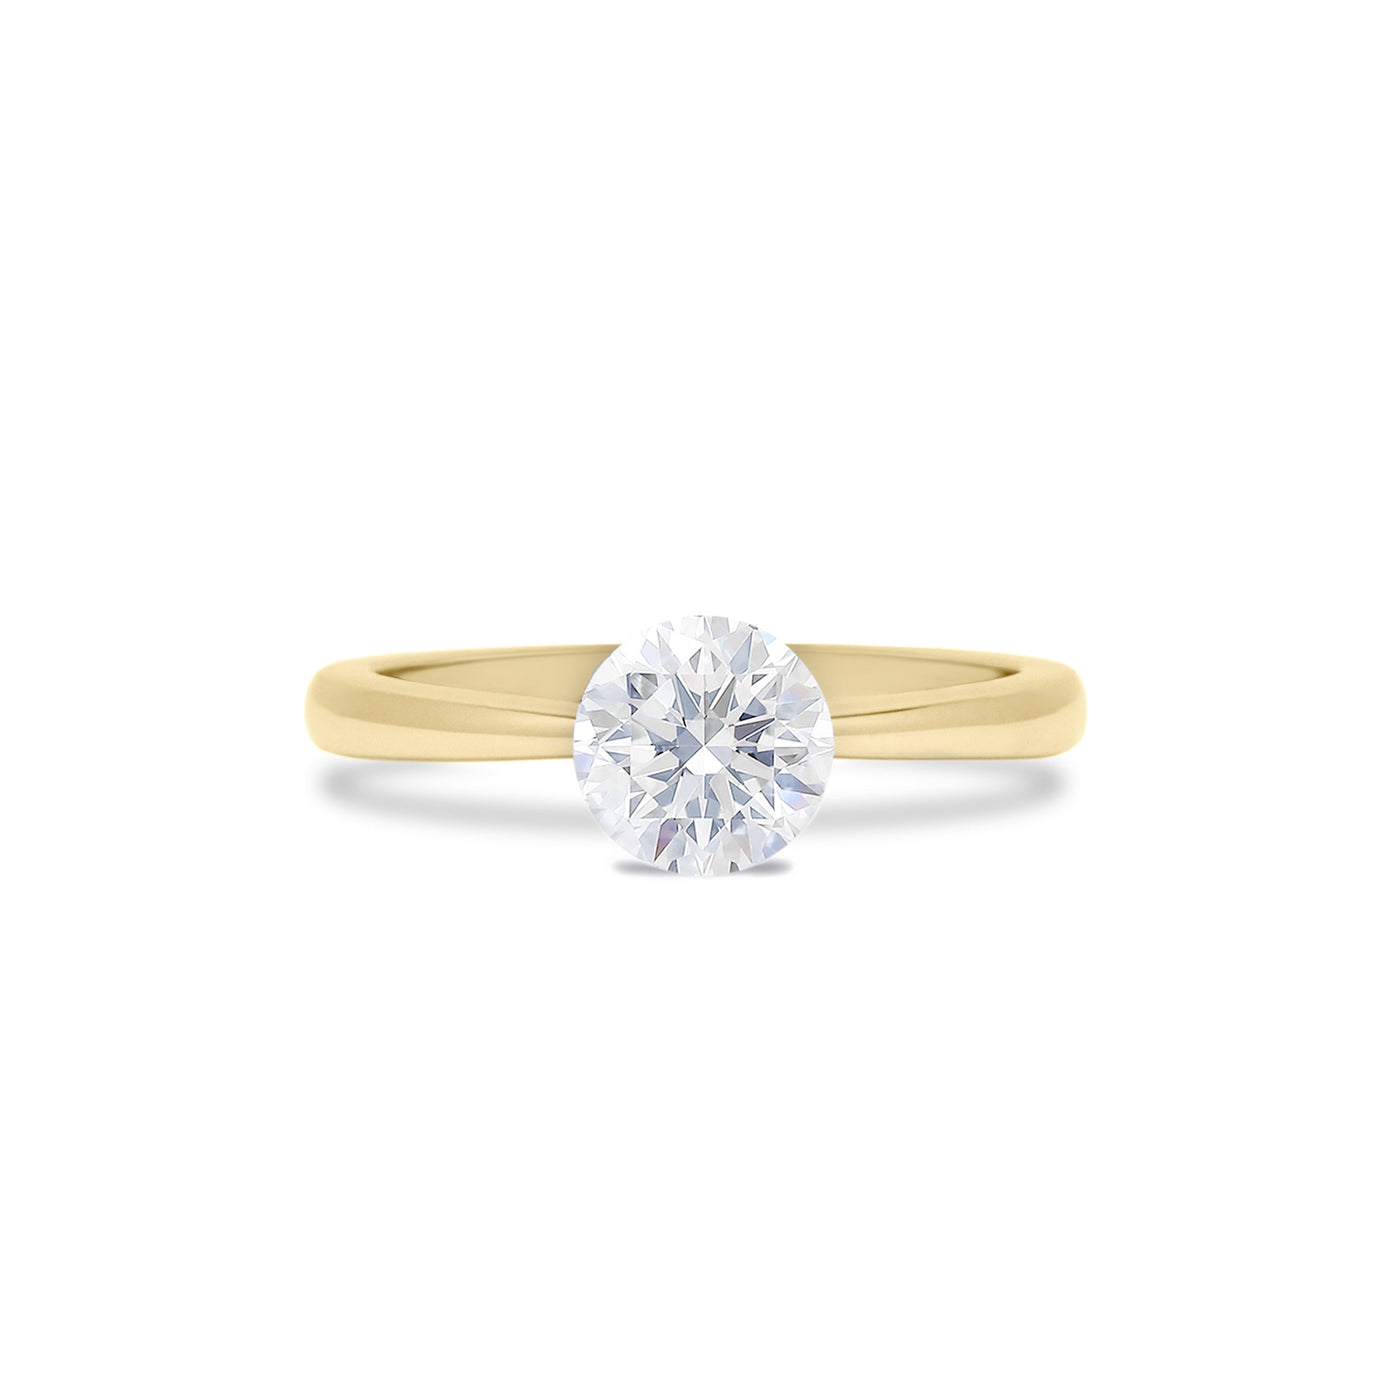 The Floeting® Diamond Ring in Yellow Gold | 1.01ct E VVS2